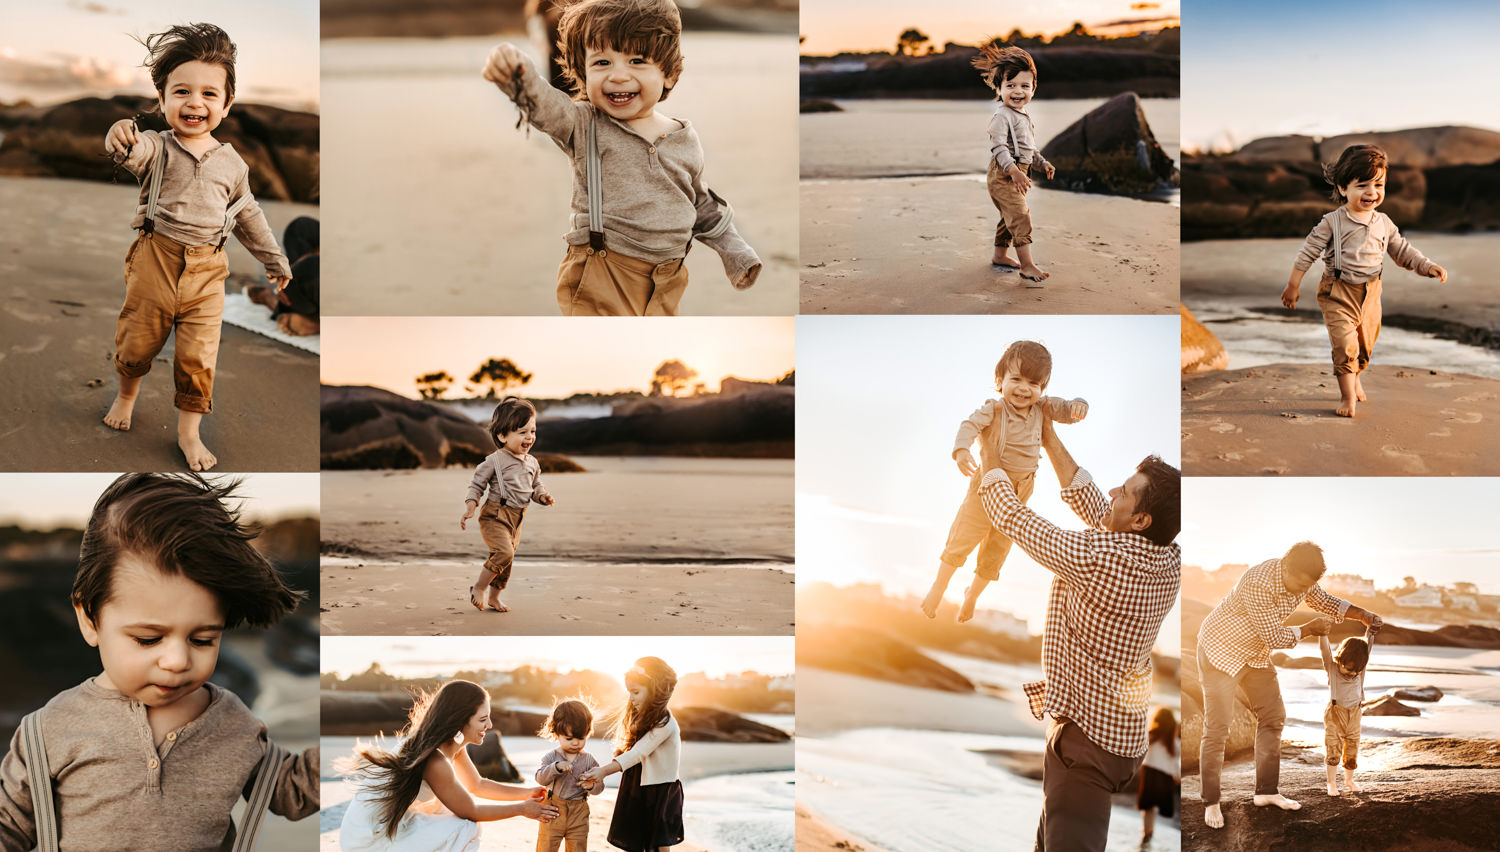 Kids Photography Ideas – 21 Easy Tips For Great Pictures Of Children